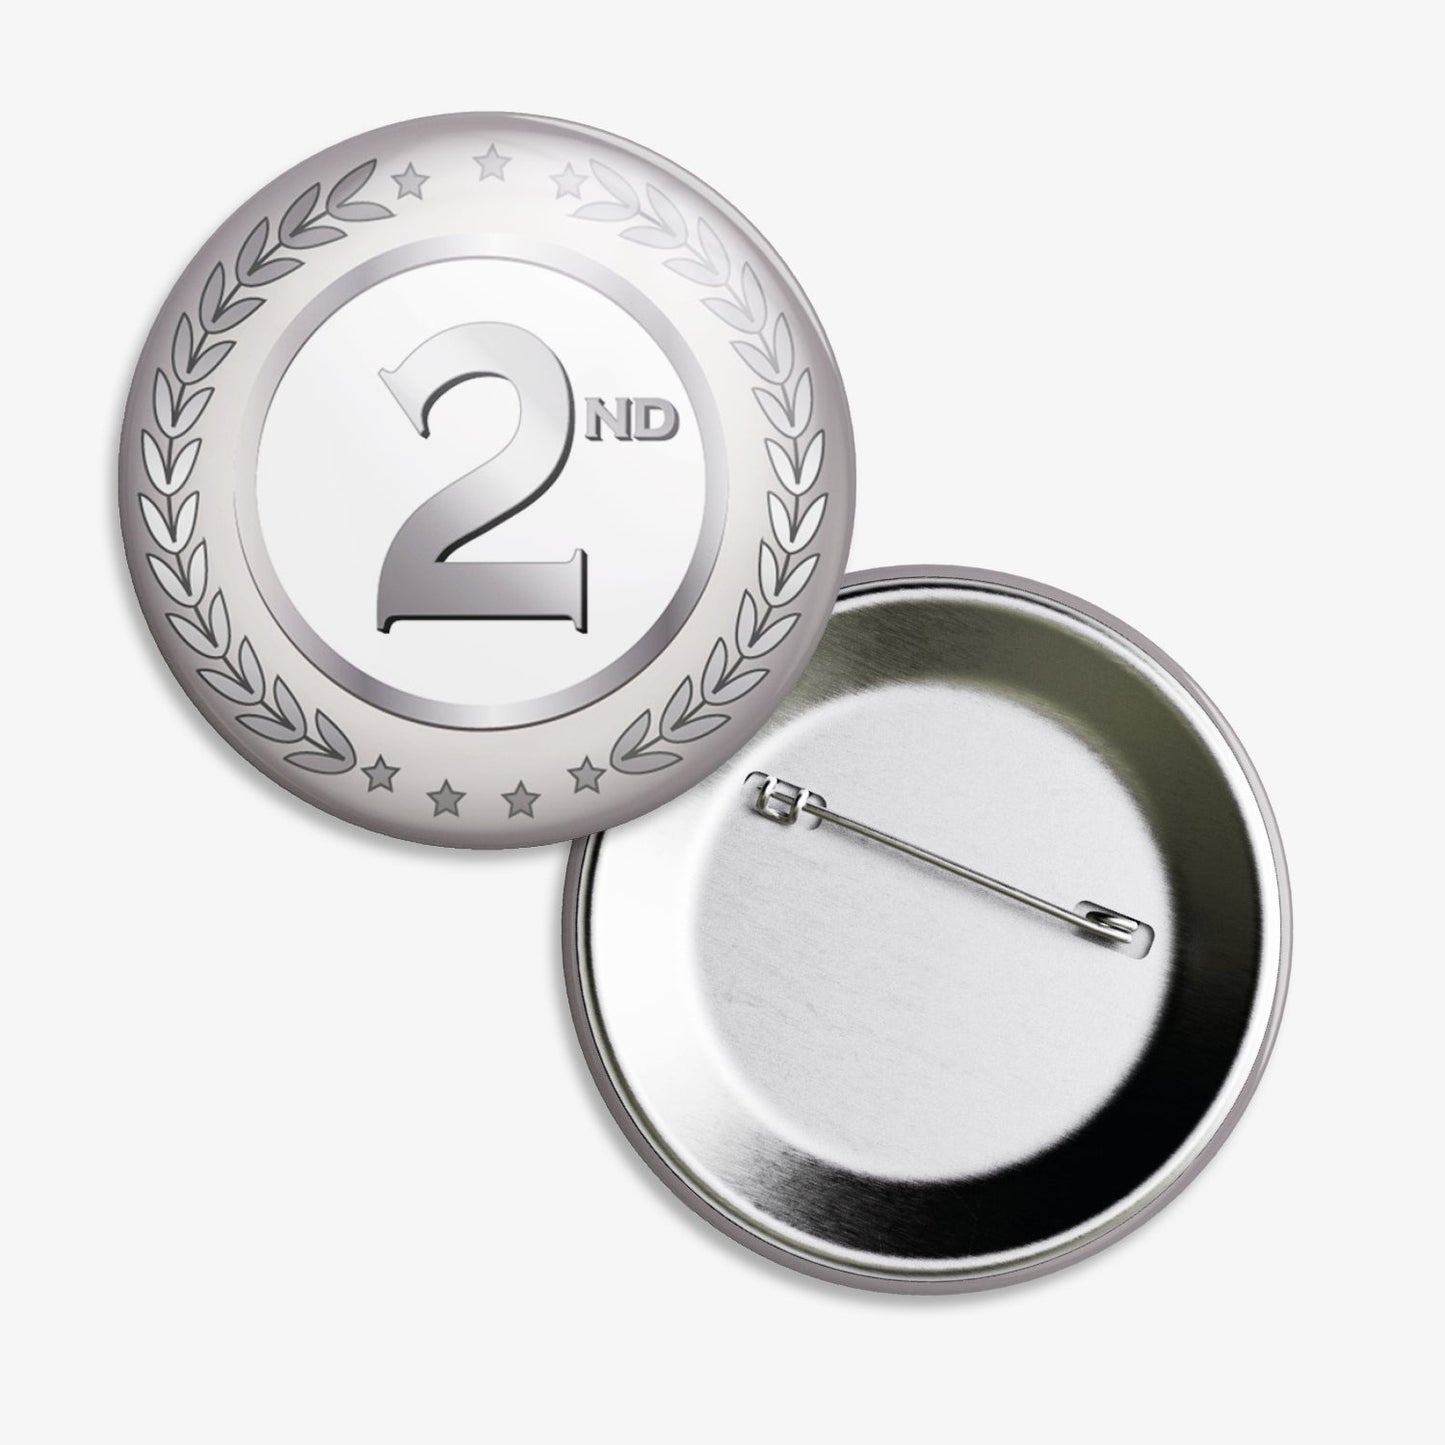 10 Second Badges - Silver